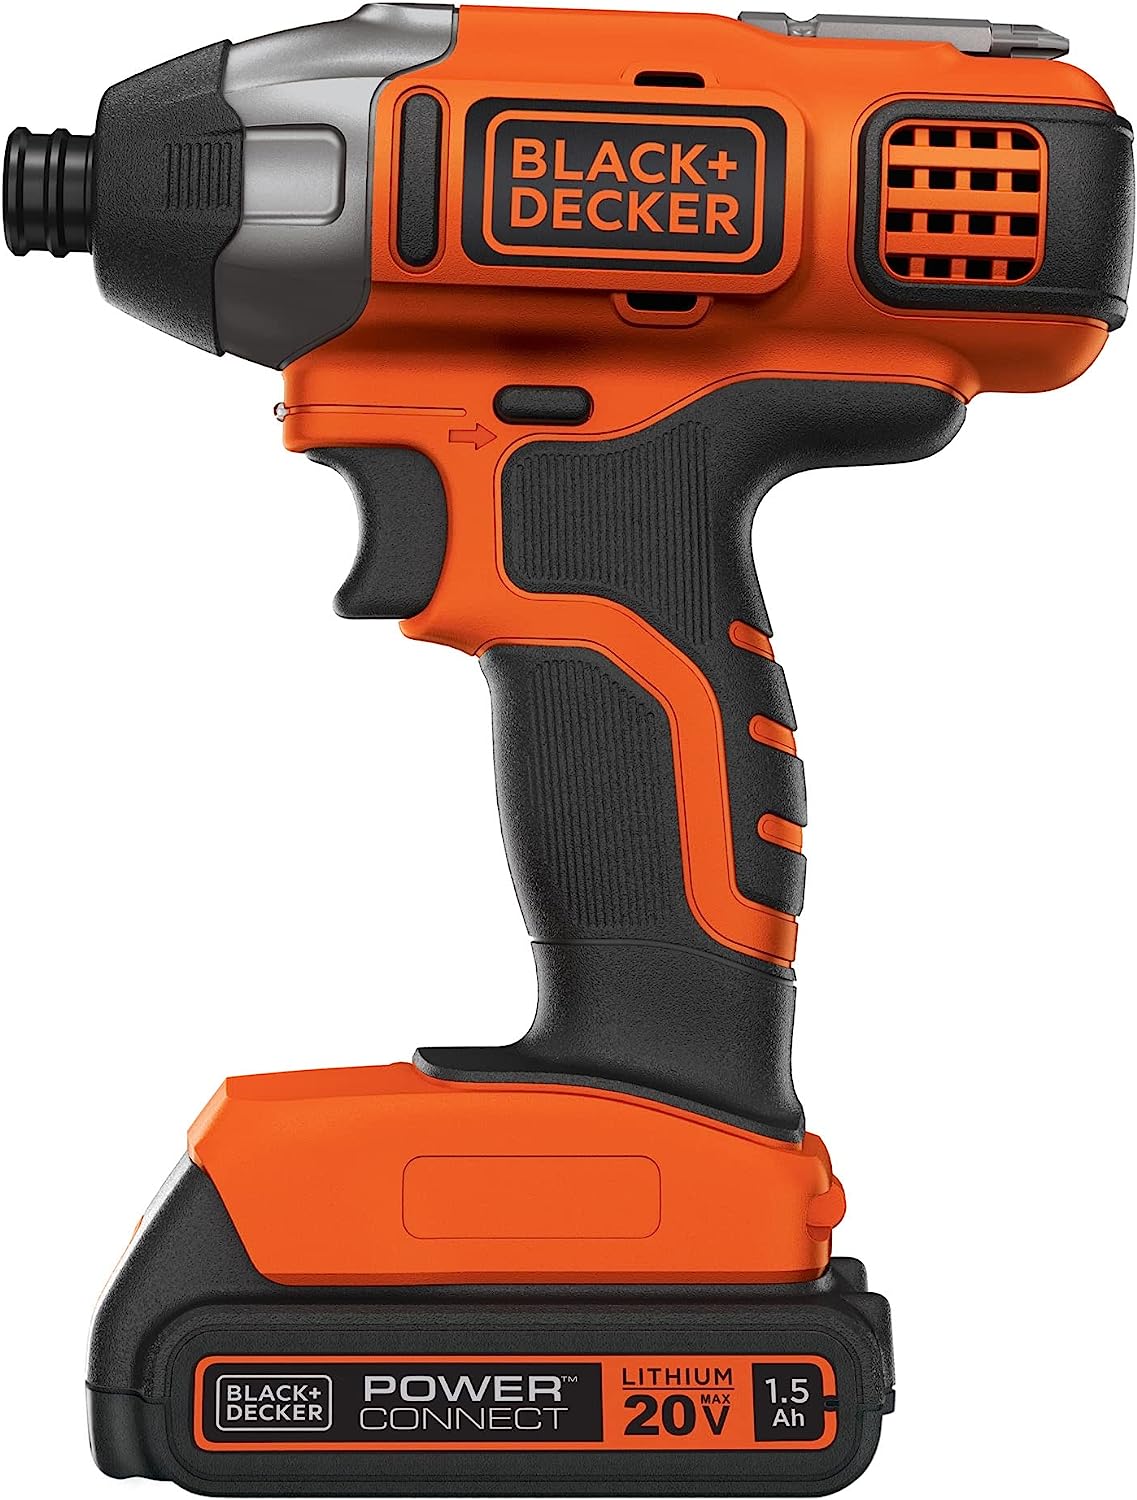 BLACK+DECKER 20V MAX* POWERCONNECT 1/4 in. Cordless [...]